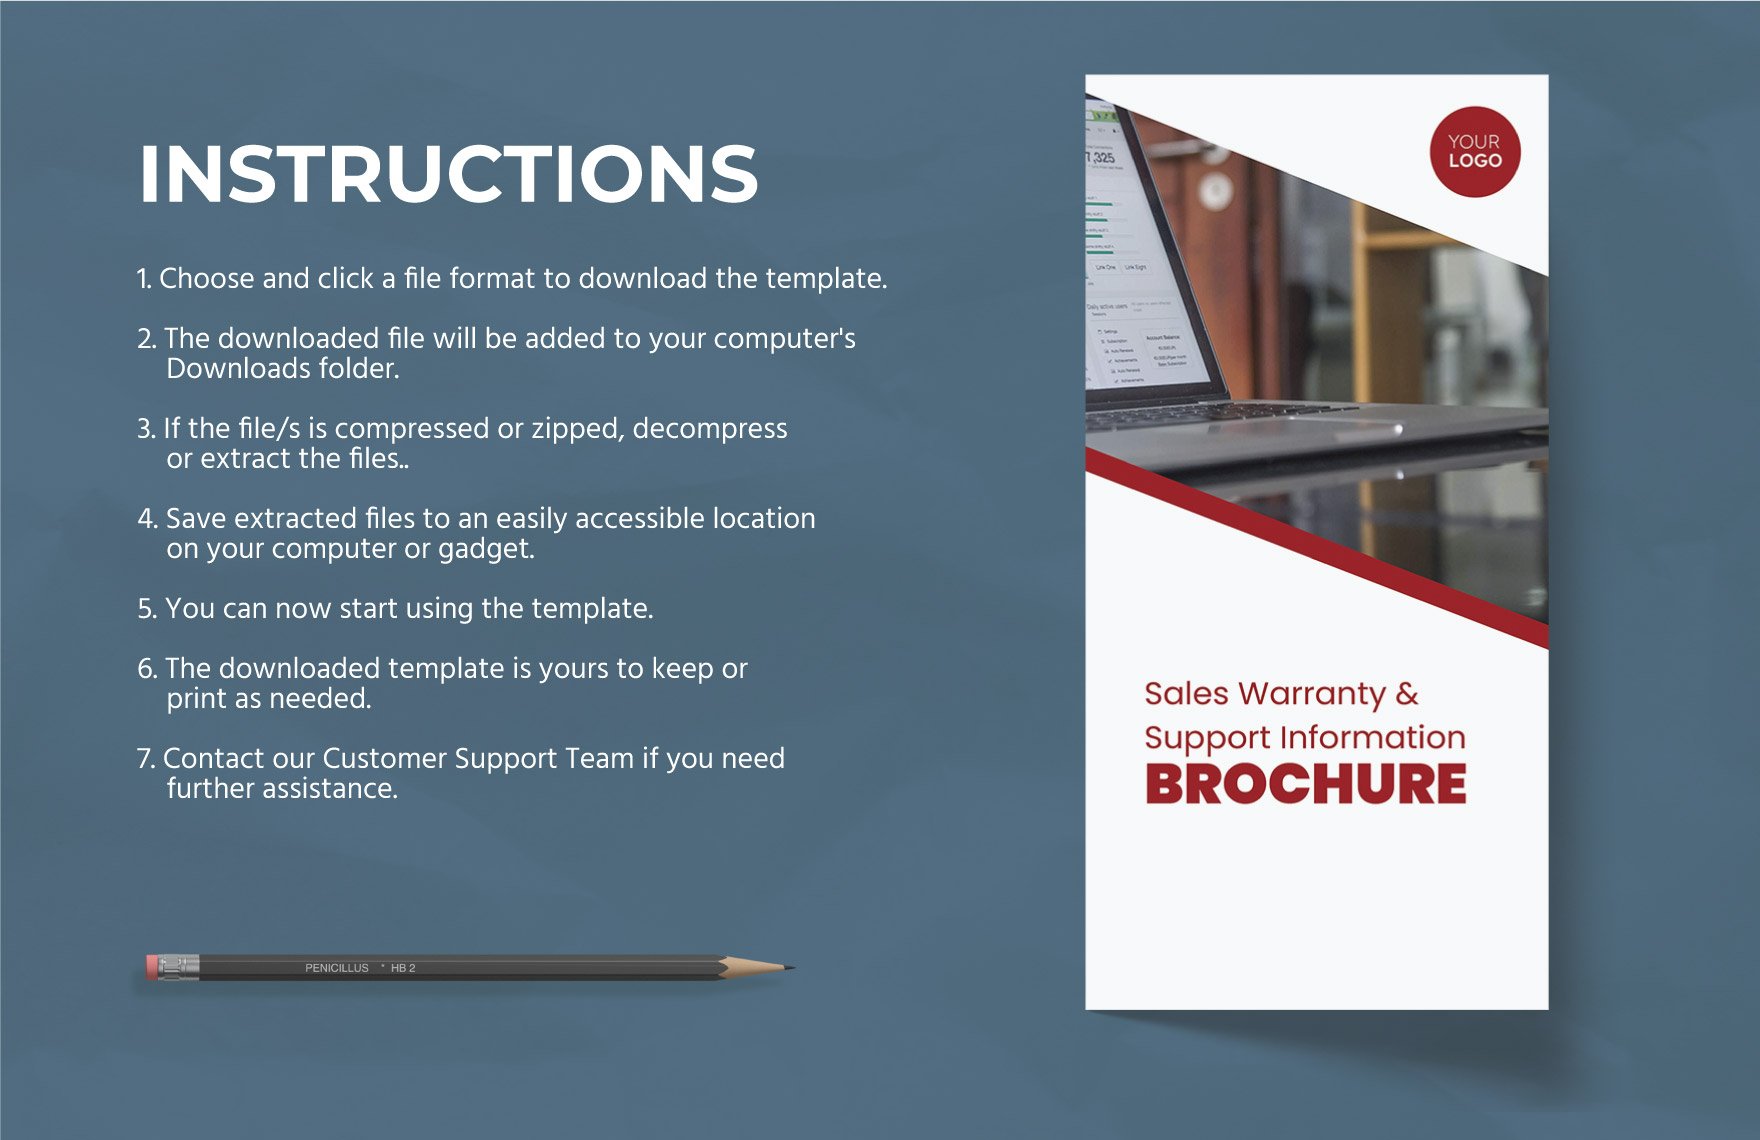 Sales Warranty and Support Information Brochure Template